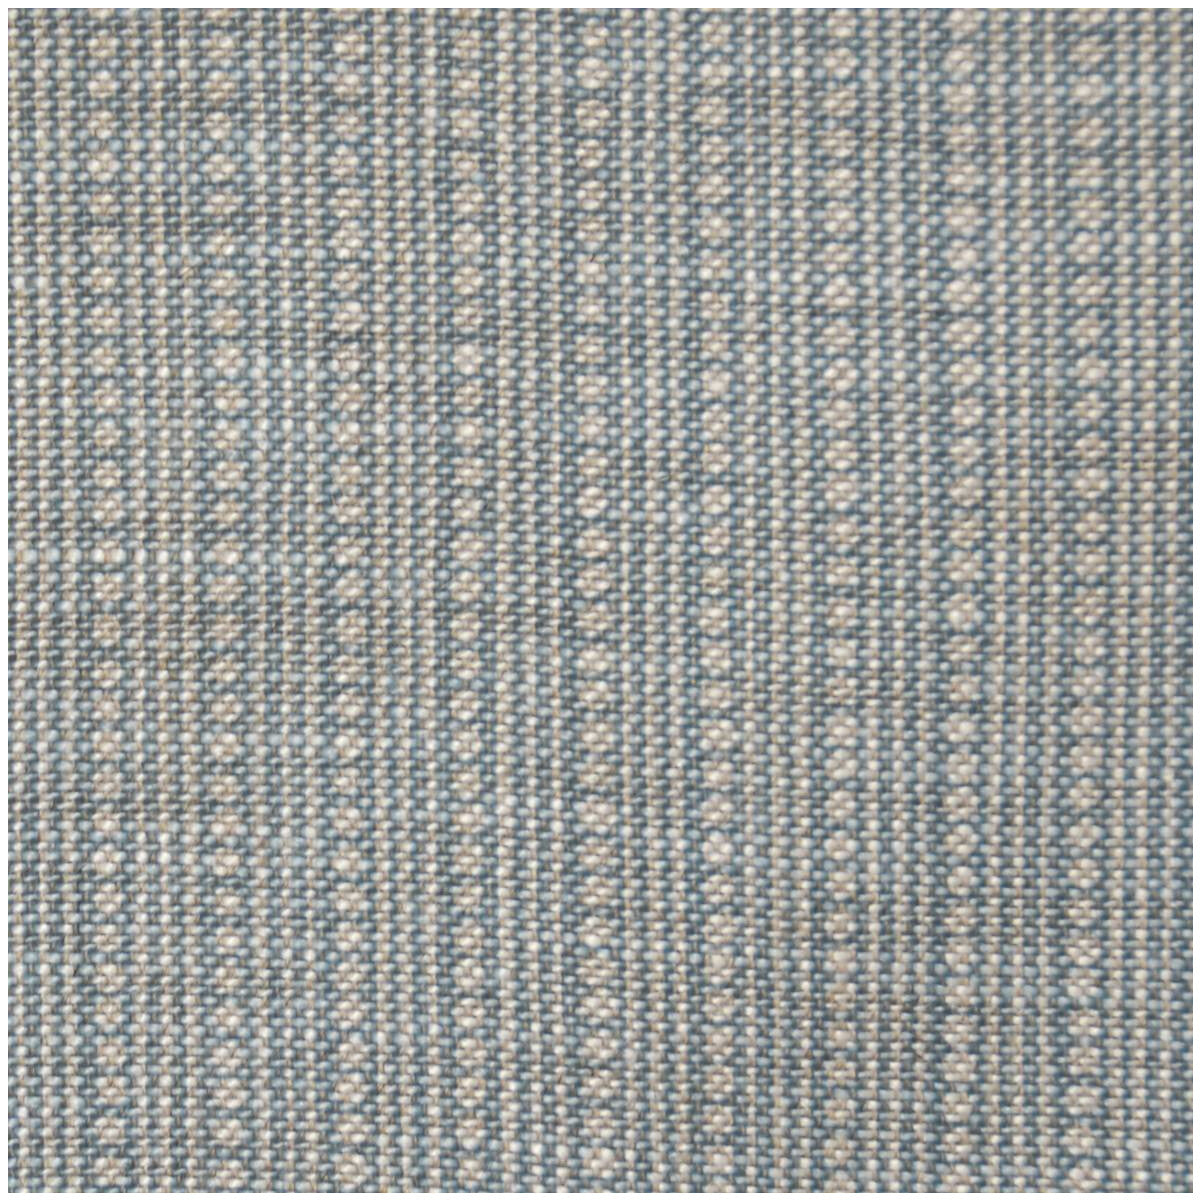 Wicklewood fabric in blue/oatmeal color - pattern BFC-3537.5.0 - by Lee Jofa in the Blithfield collection